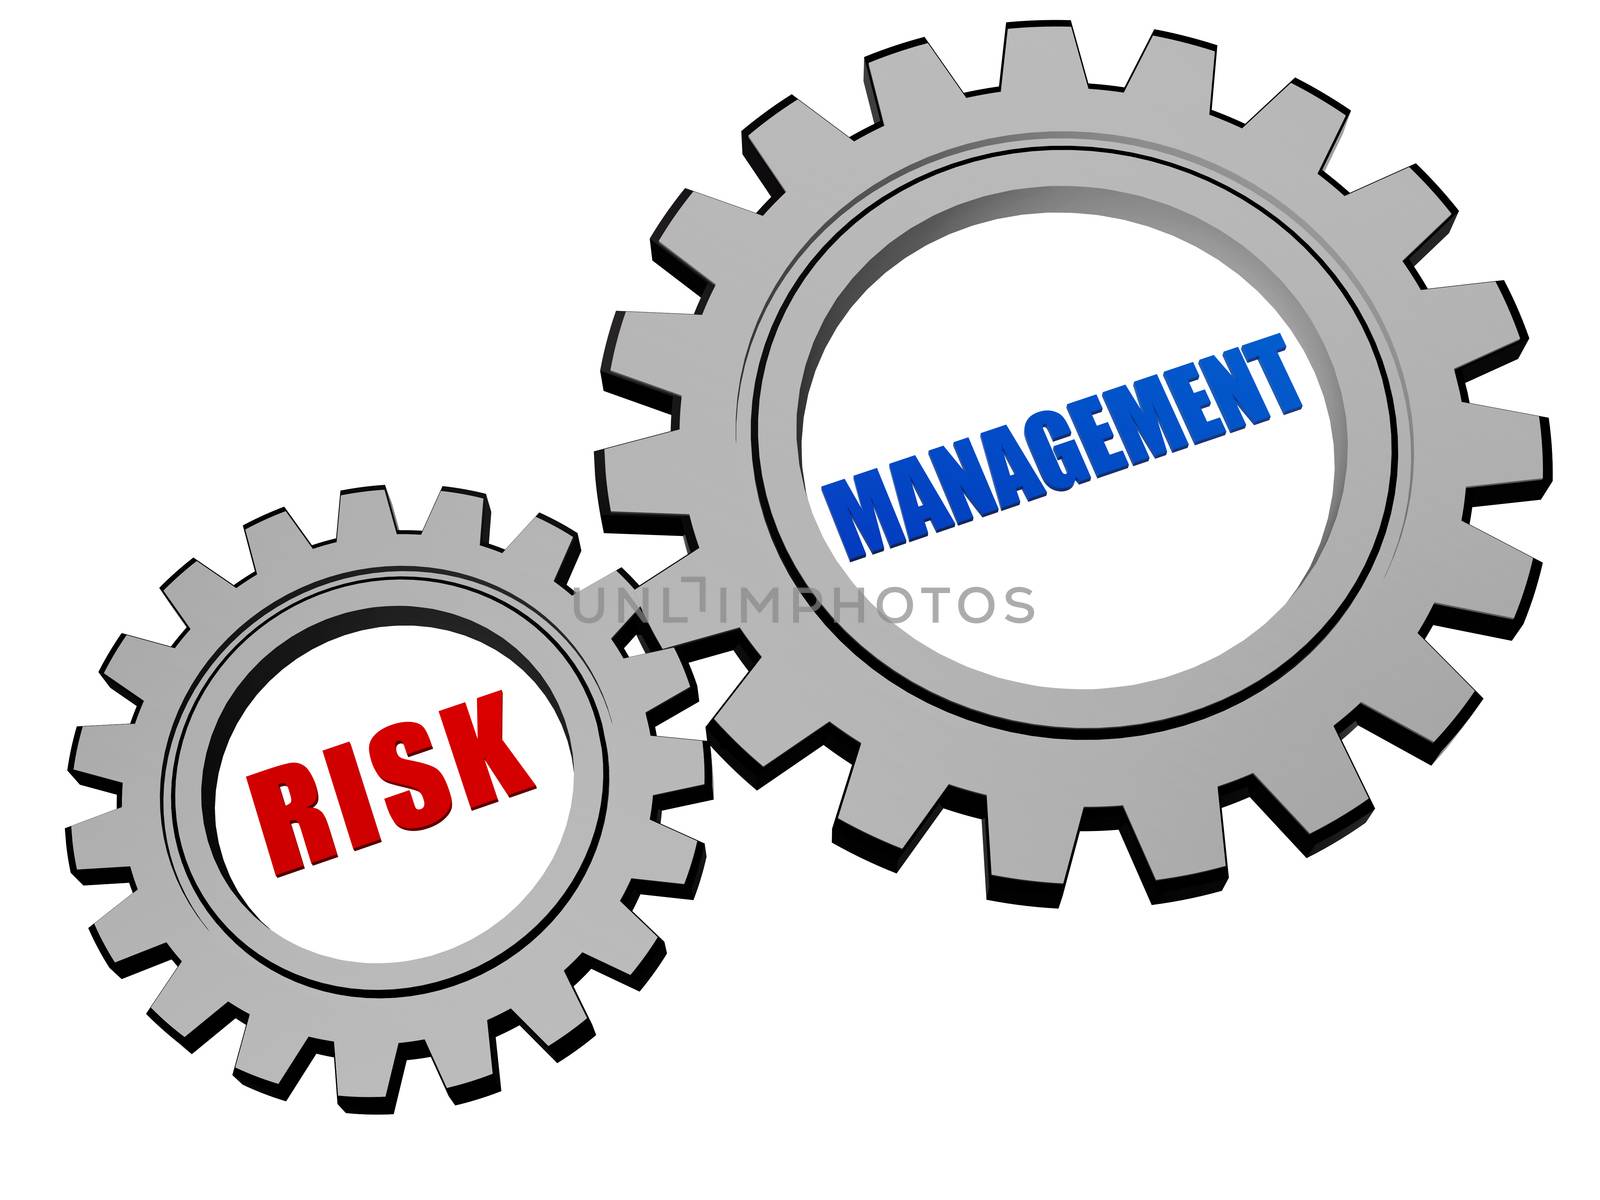 risk management - text in 3d silver grey metal gear wheels, business organization concept words